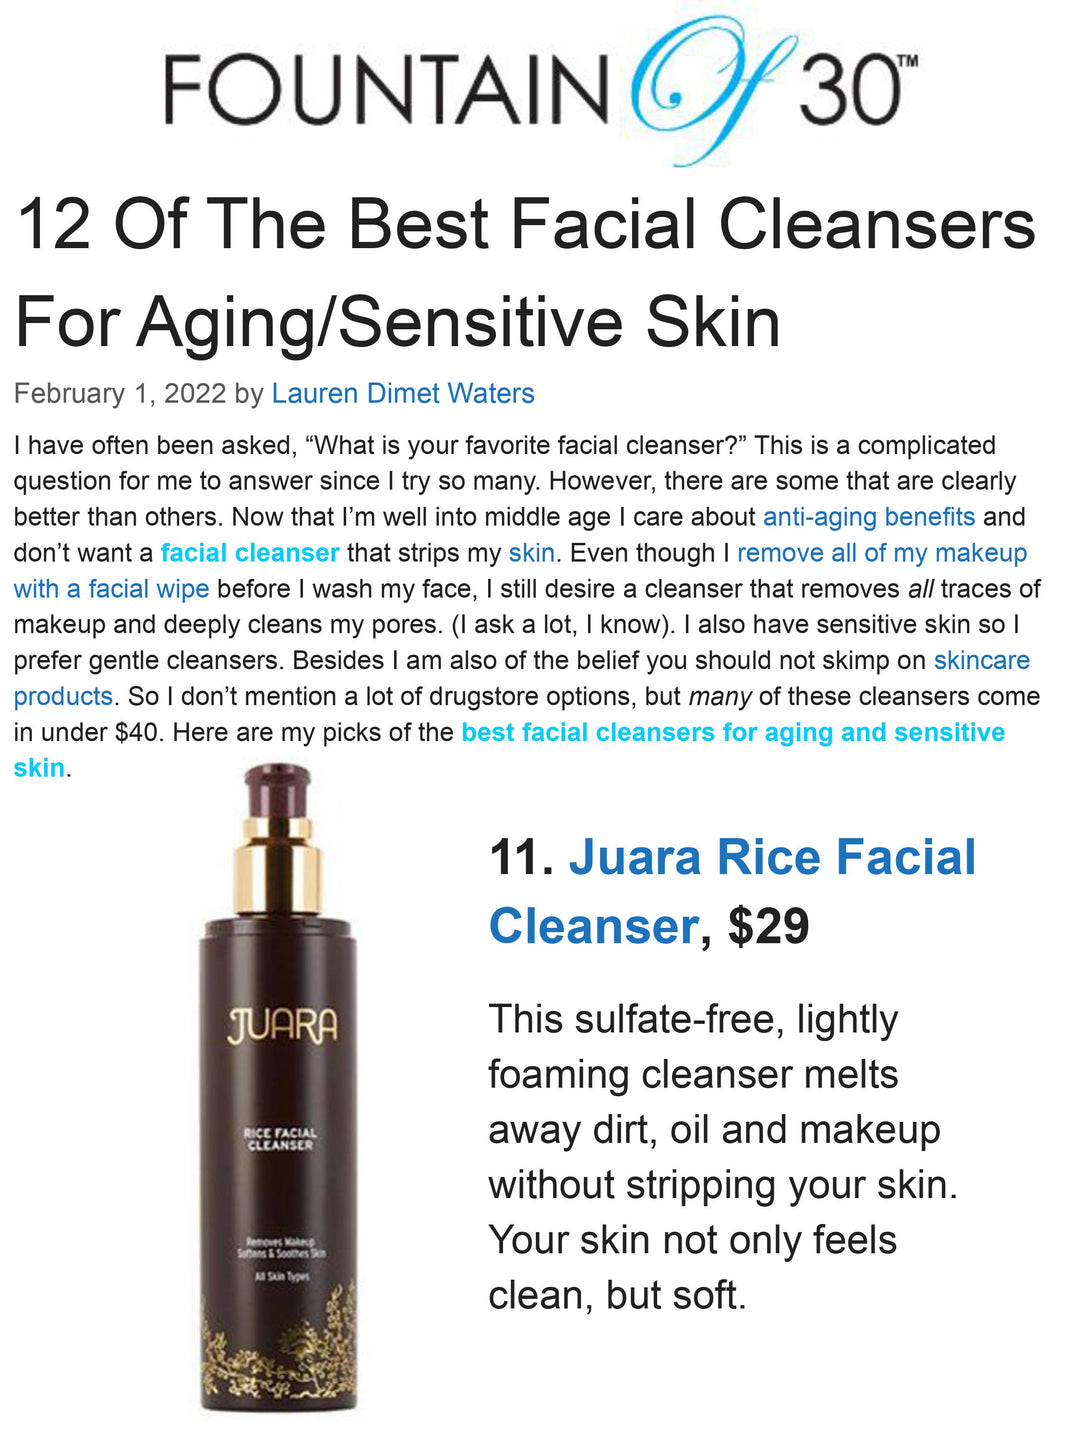 FOUNTAIN OF 30: 12 Of The Best Facial Cleansers For Aging/Sensitive Skin